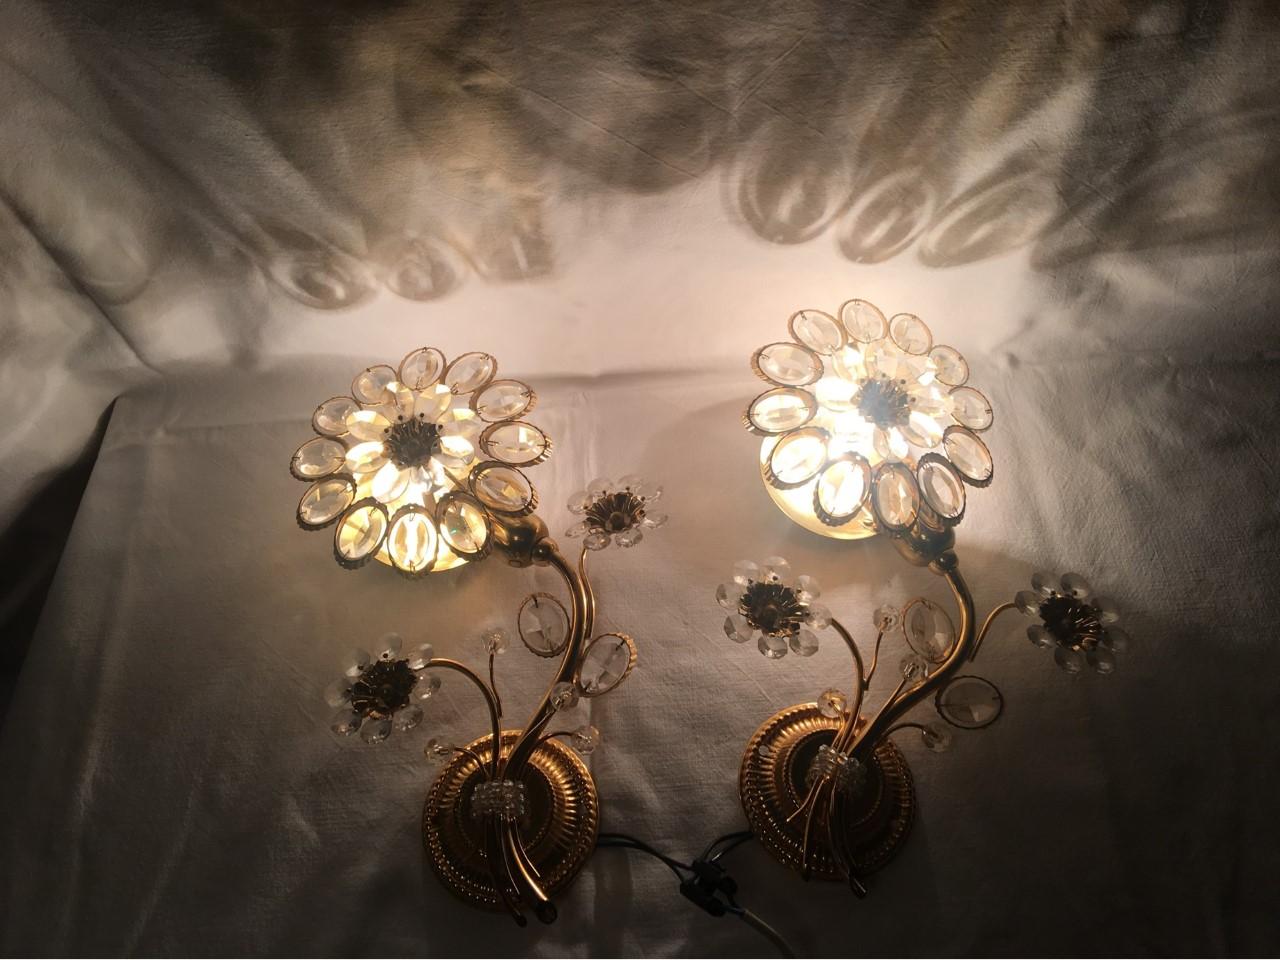 From the German manufacturer Palwa. A pair of lovely flower shaped Sconces. From the early 1970s. Each one requires one European E 14 candelabra bulb with a maximum of 40 watts. In good working condition. Original 20th century wiring.